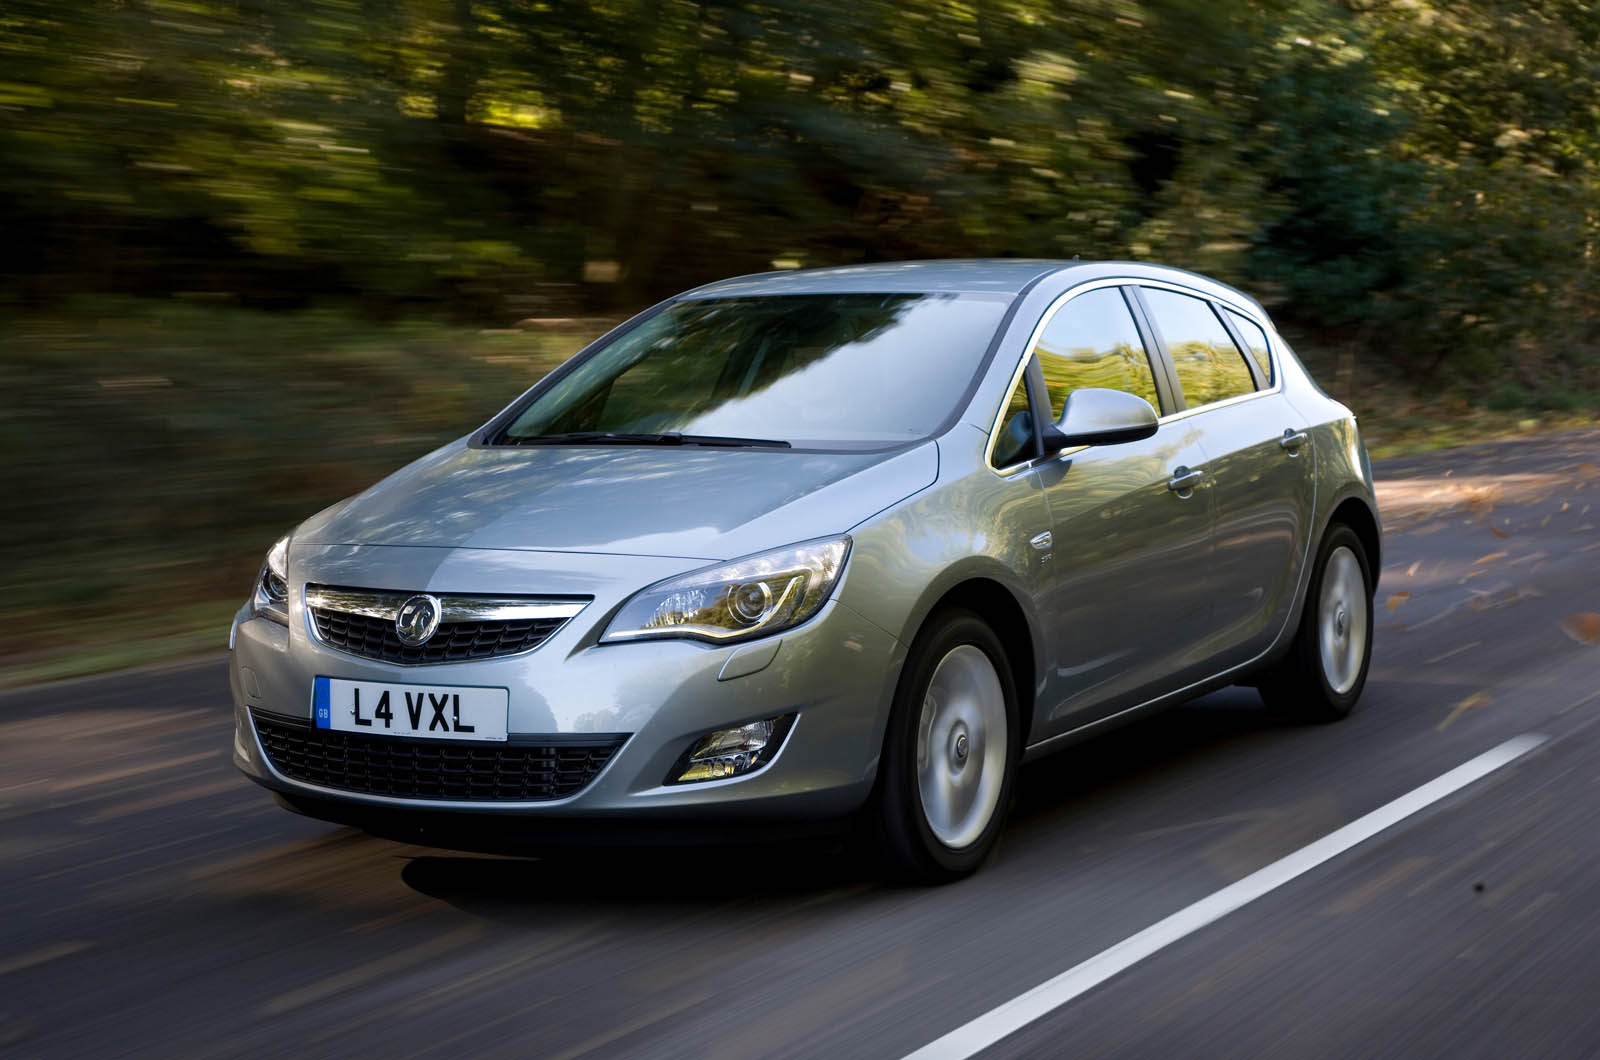 Used Vauxhall Astra 2009-2015 review